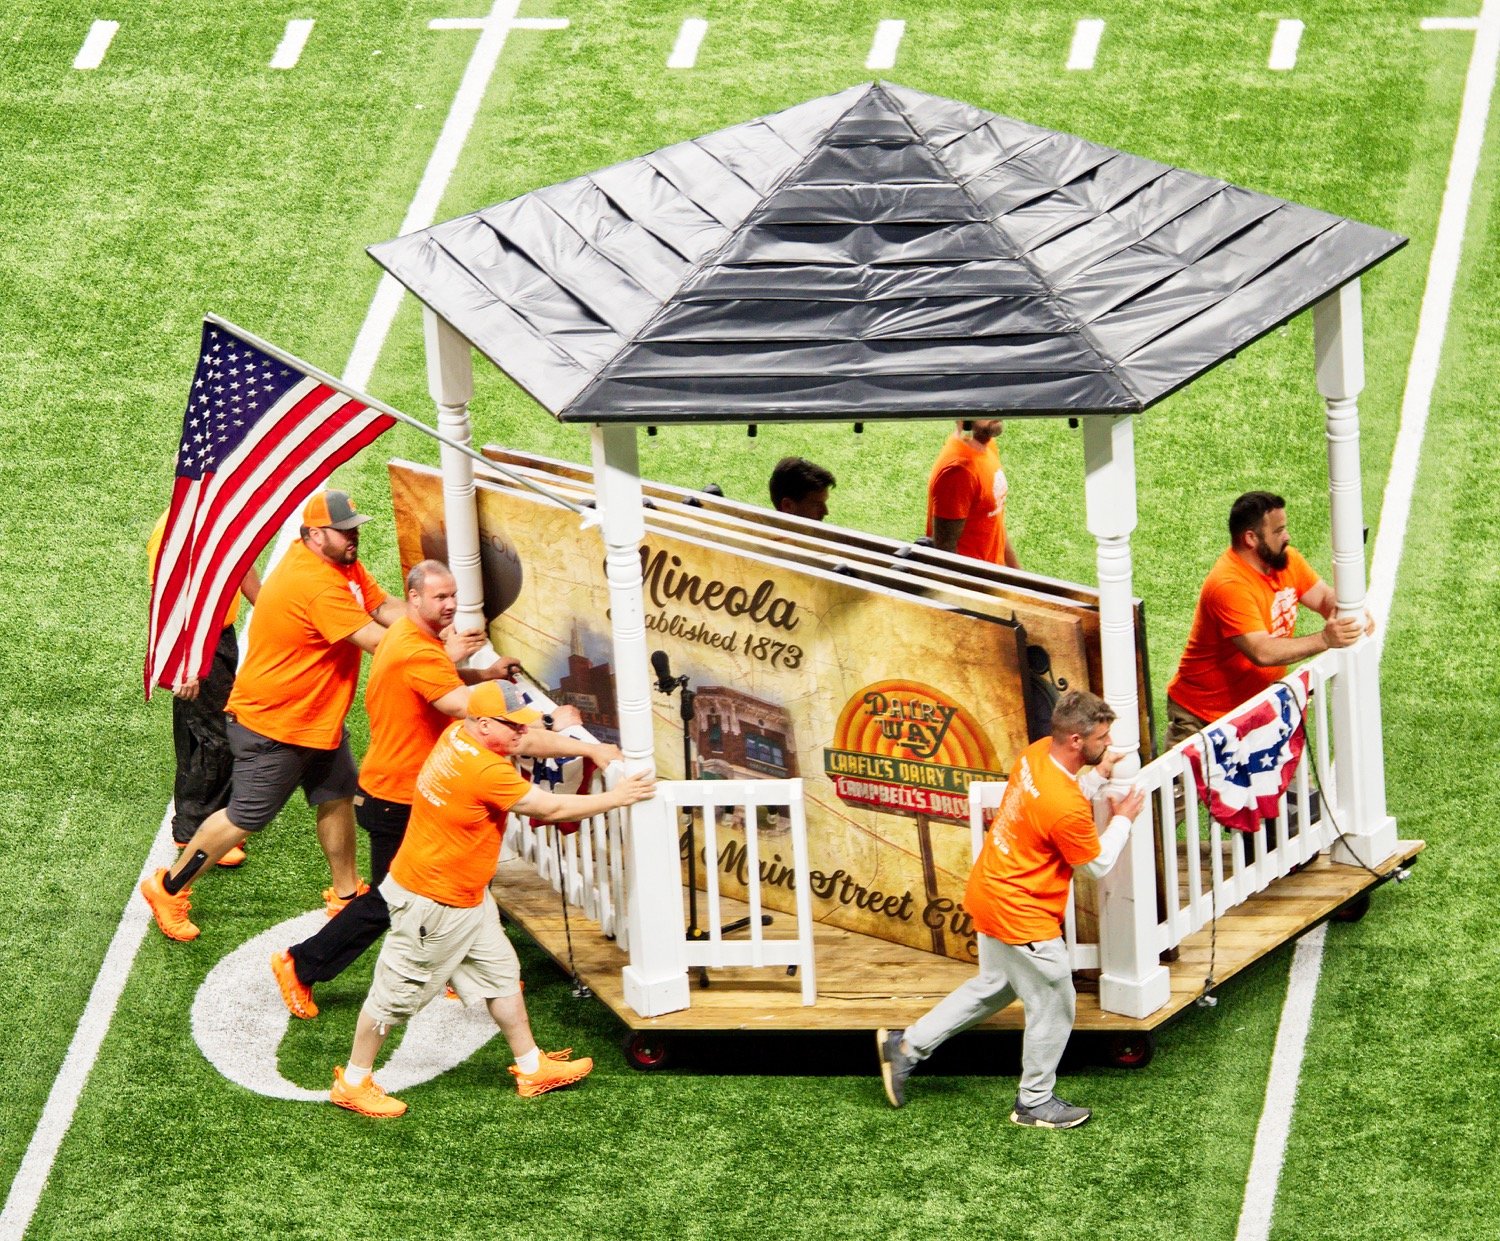 Mineola's band dads roll the replica of the downtown gazebo onto the field prior to the band's finals performance Nov. 3 in the Alamdome.

The band parents have been unbelievable, director Chris Brannan said. “They’ve done everything this year.”

They built all the props for the half-time show, “Hometown,” which was all done from scratch. [See much more of the prelim and finals performances.]